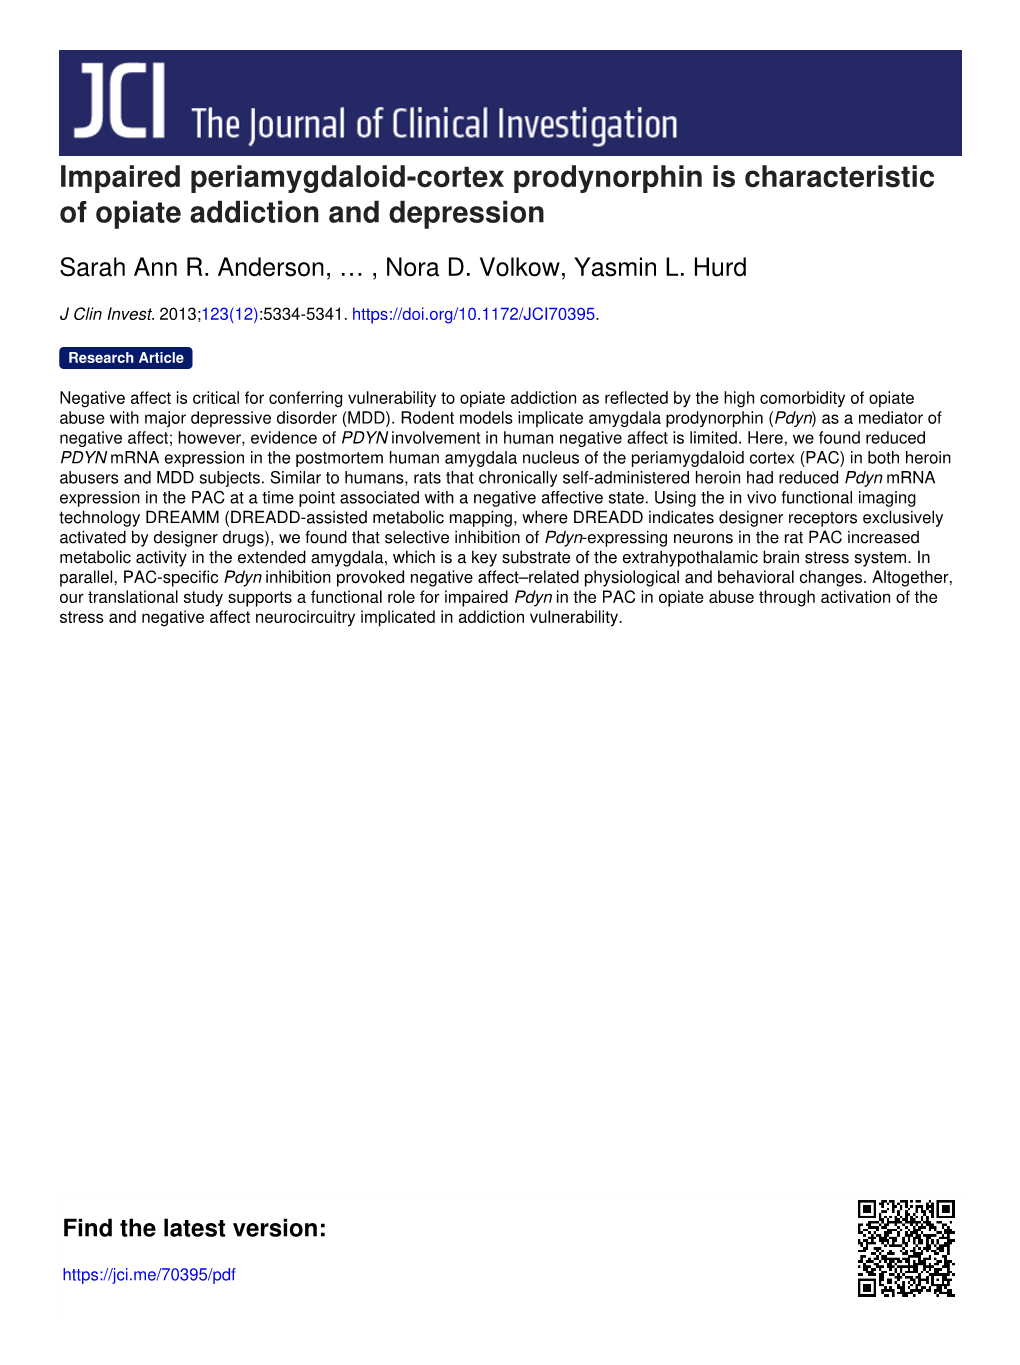 Impaired Periamygdaloid-Cortex Prodynorphin Is Characteristic of Opiate Addiction and Depression